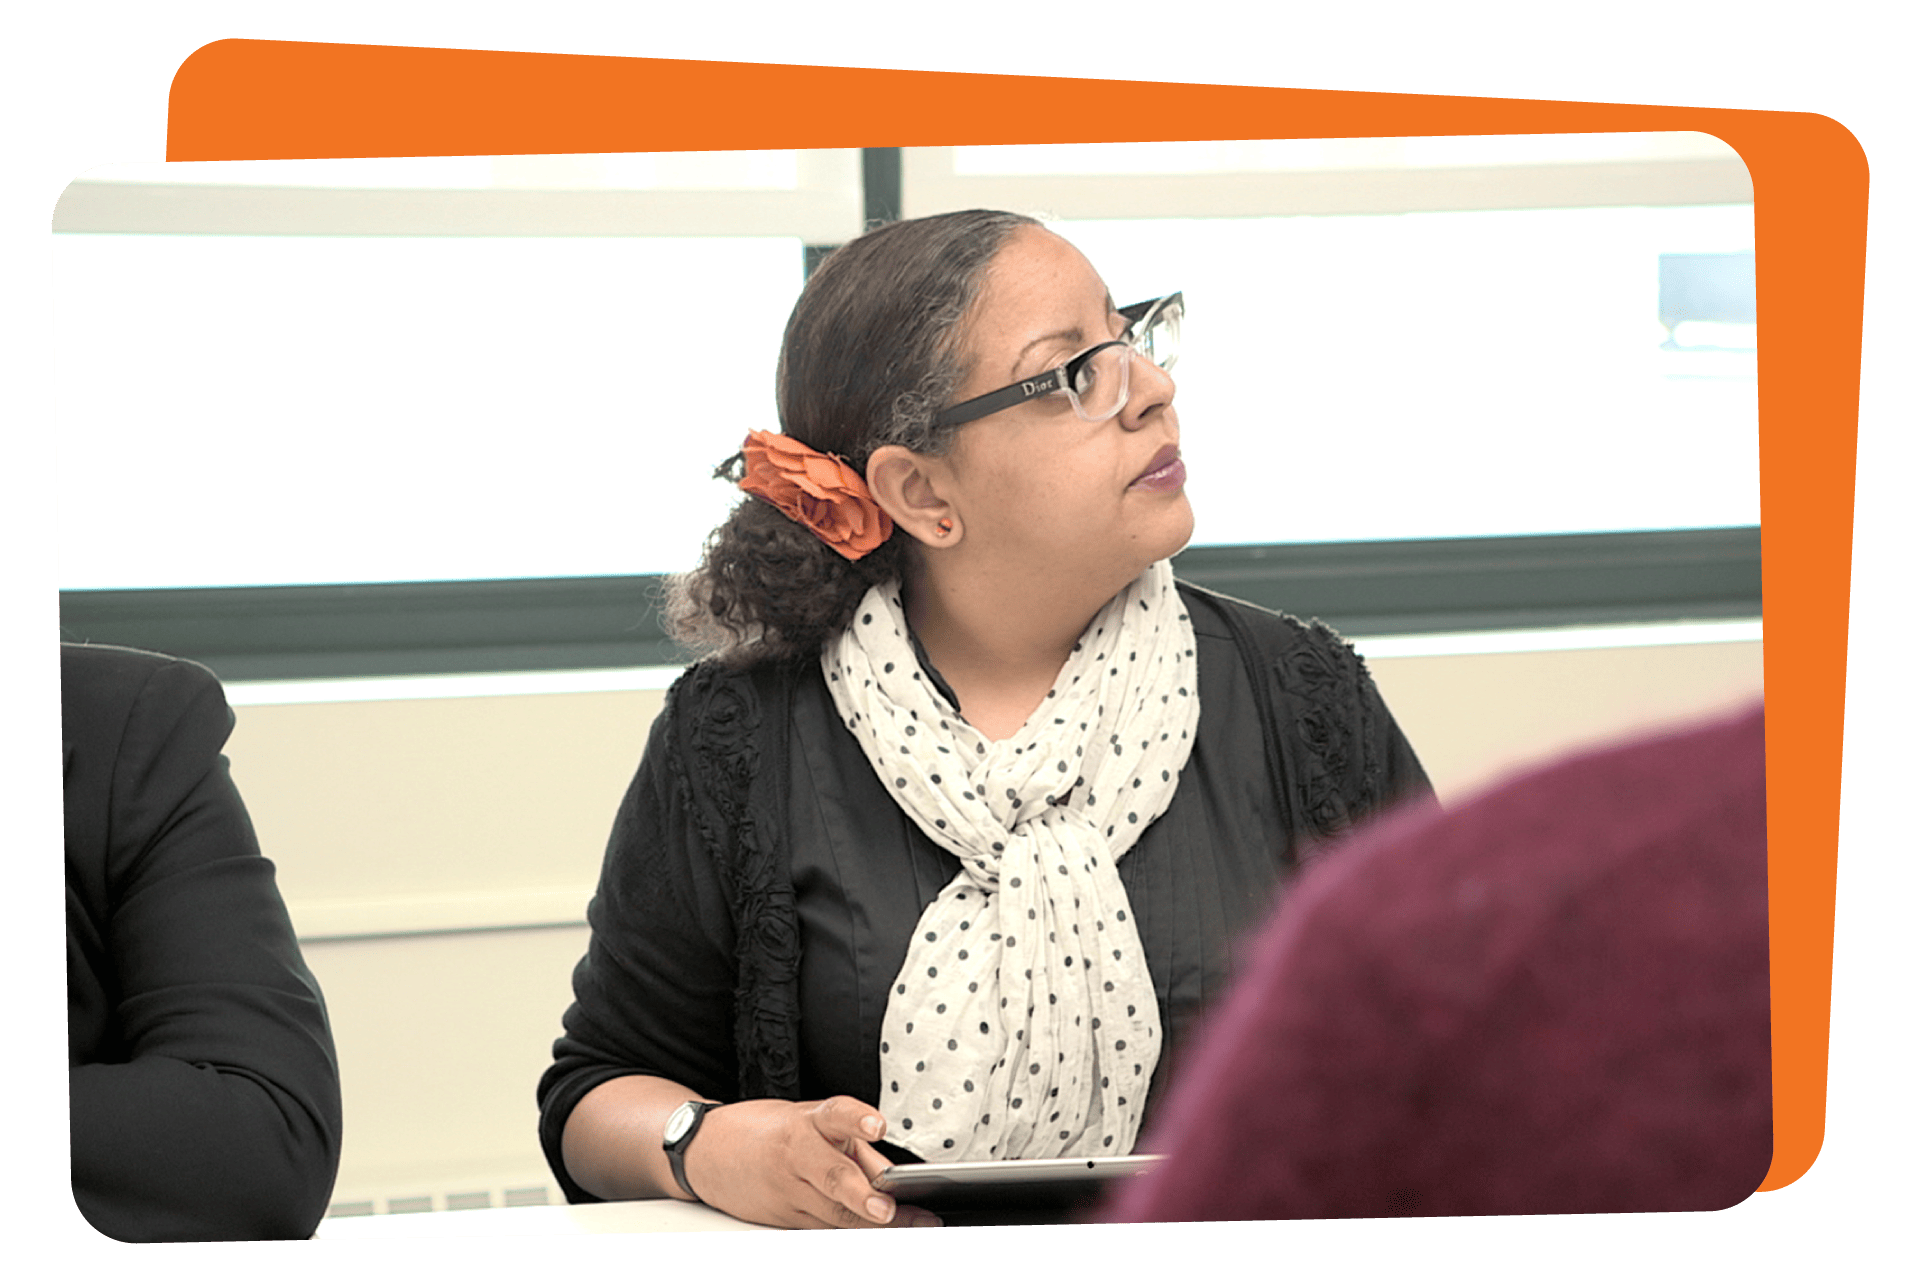 Woman with glasses, wearing a scarf and a flower in her hair, attentively listening in a classroom setting.